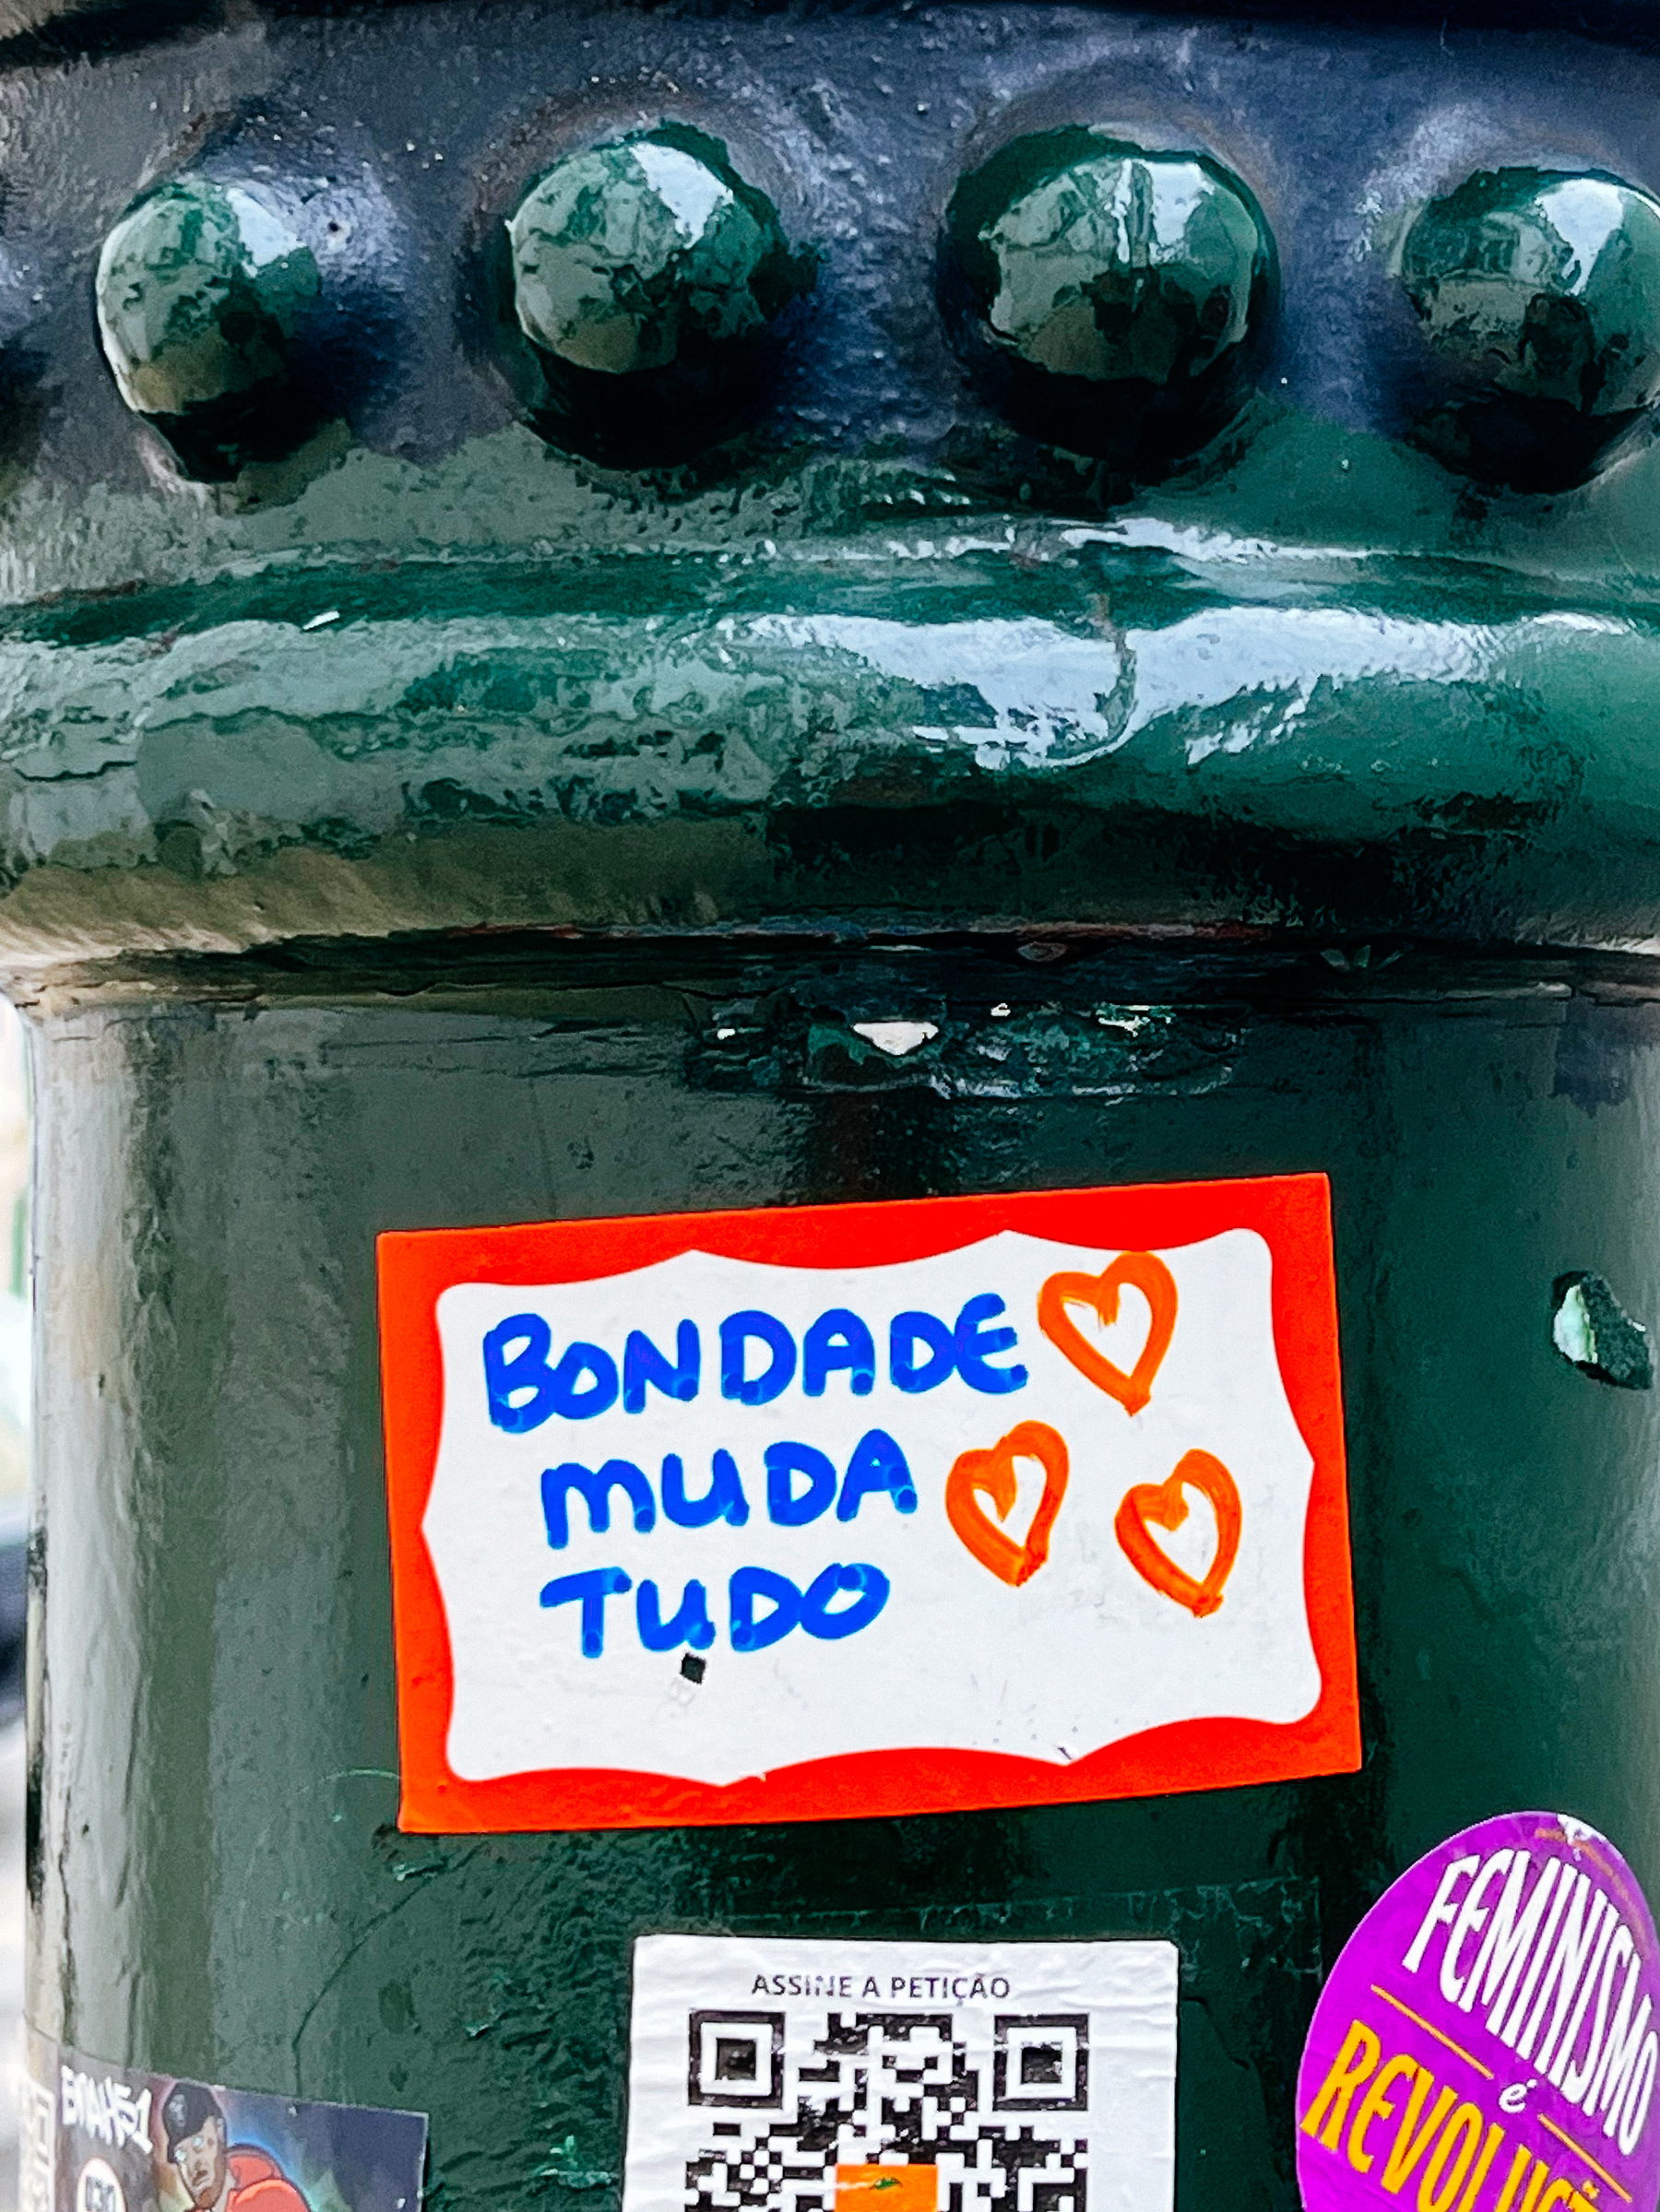 Sticker with three hand drawn hearts, and the words “Bondade muda tudo” (Kindness changes everything).